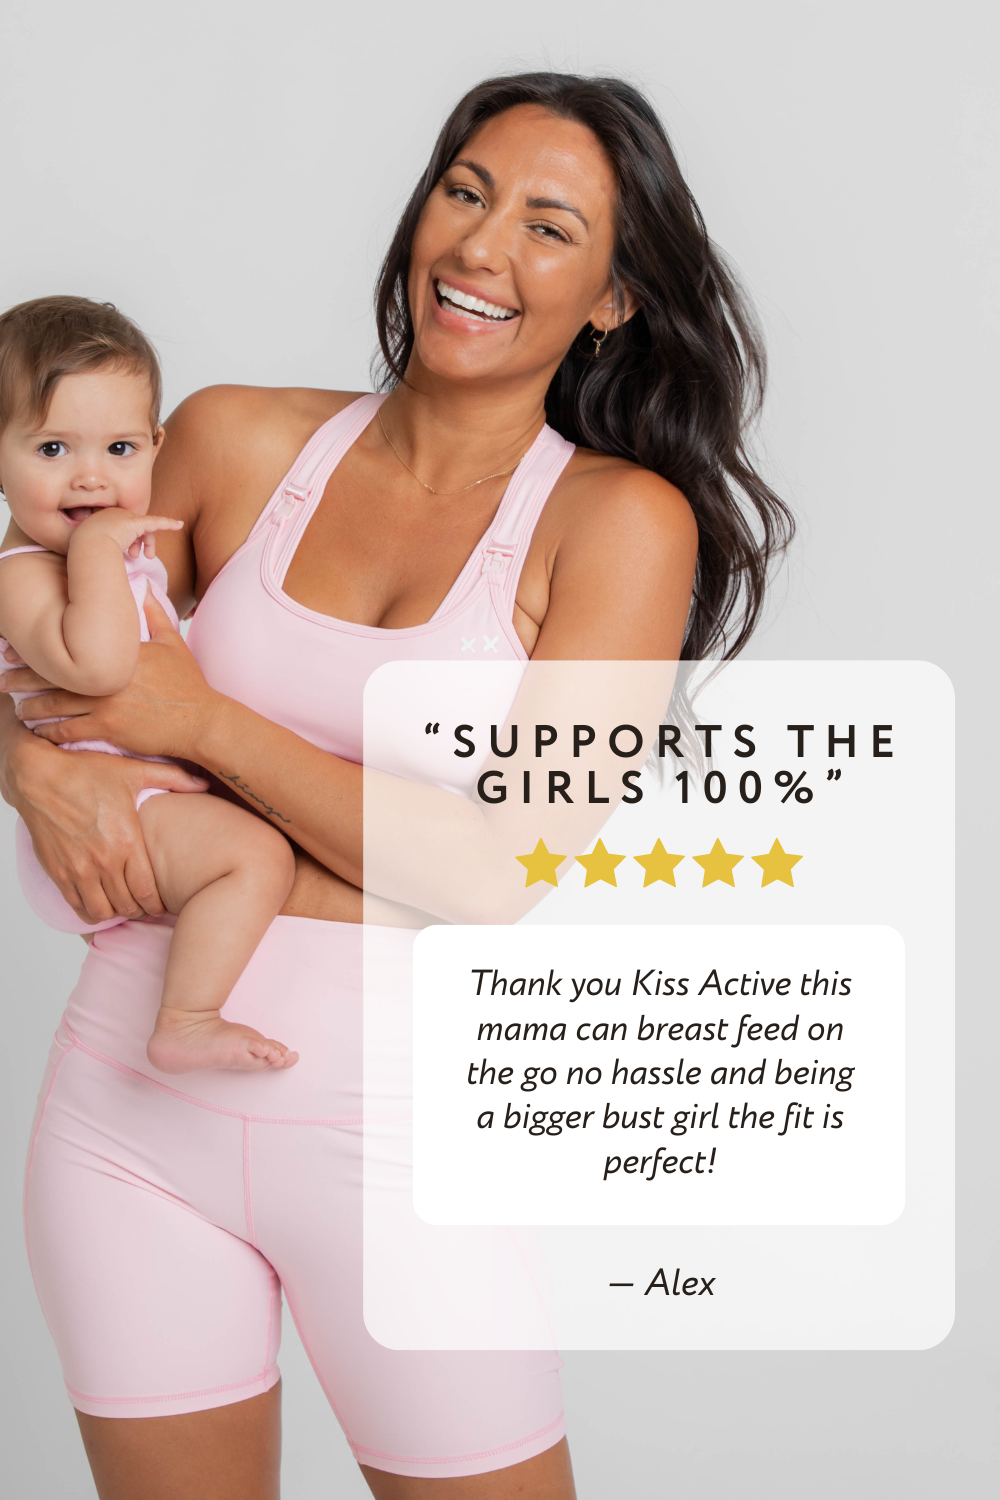 Ashy Bines - LIFESAVER - this maternity sports bra from @cadenshae !! . Super  supportive and I can do everything in my  active wear haha . Breast  feeding in my active